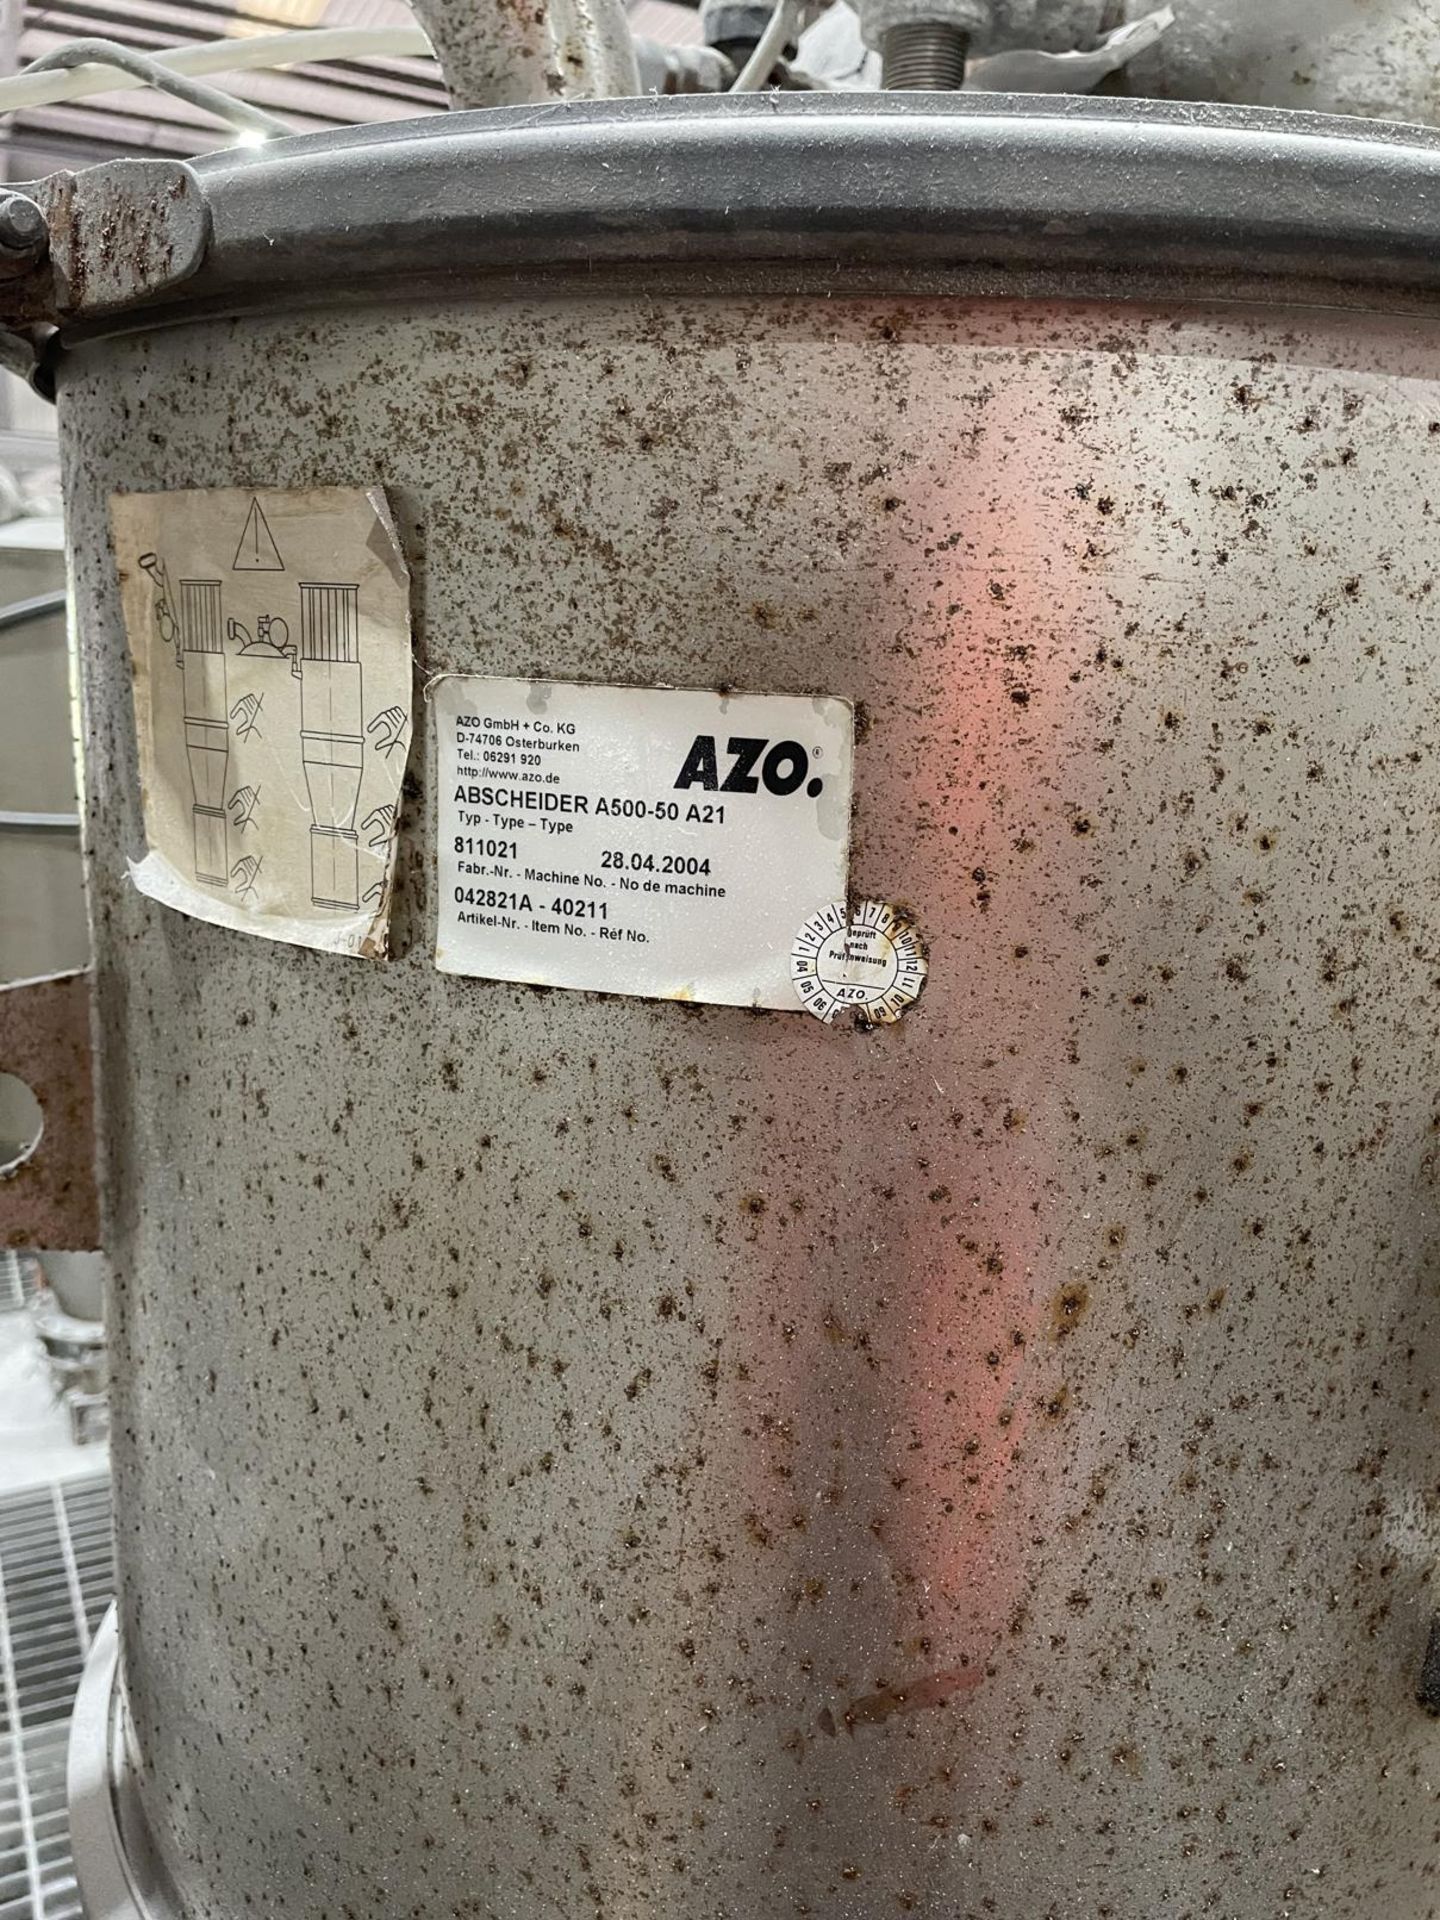 AZO Abscheider A500-50-A21 Raw Material Hopper FeedRAMS To Be Approved Before Removal - Image 2 of 2